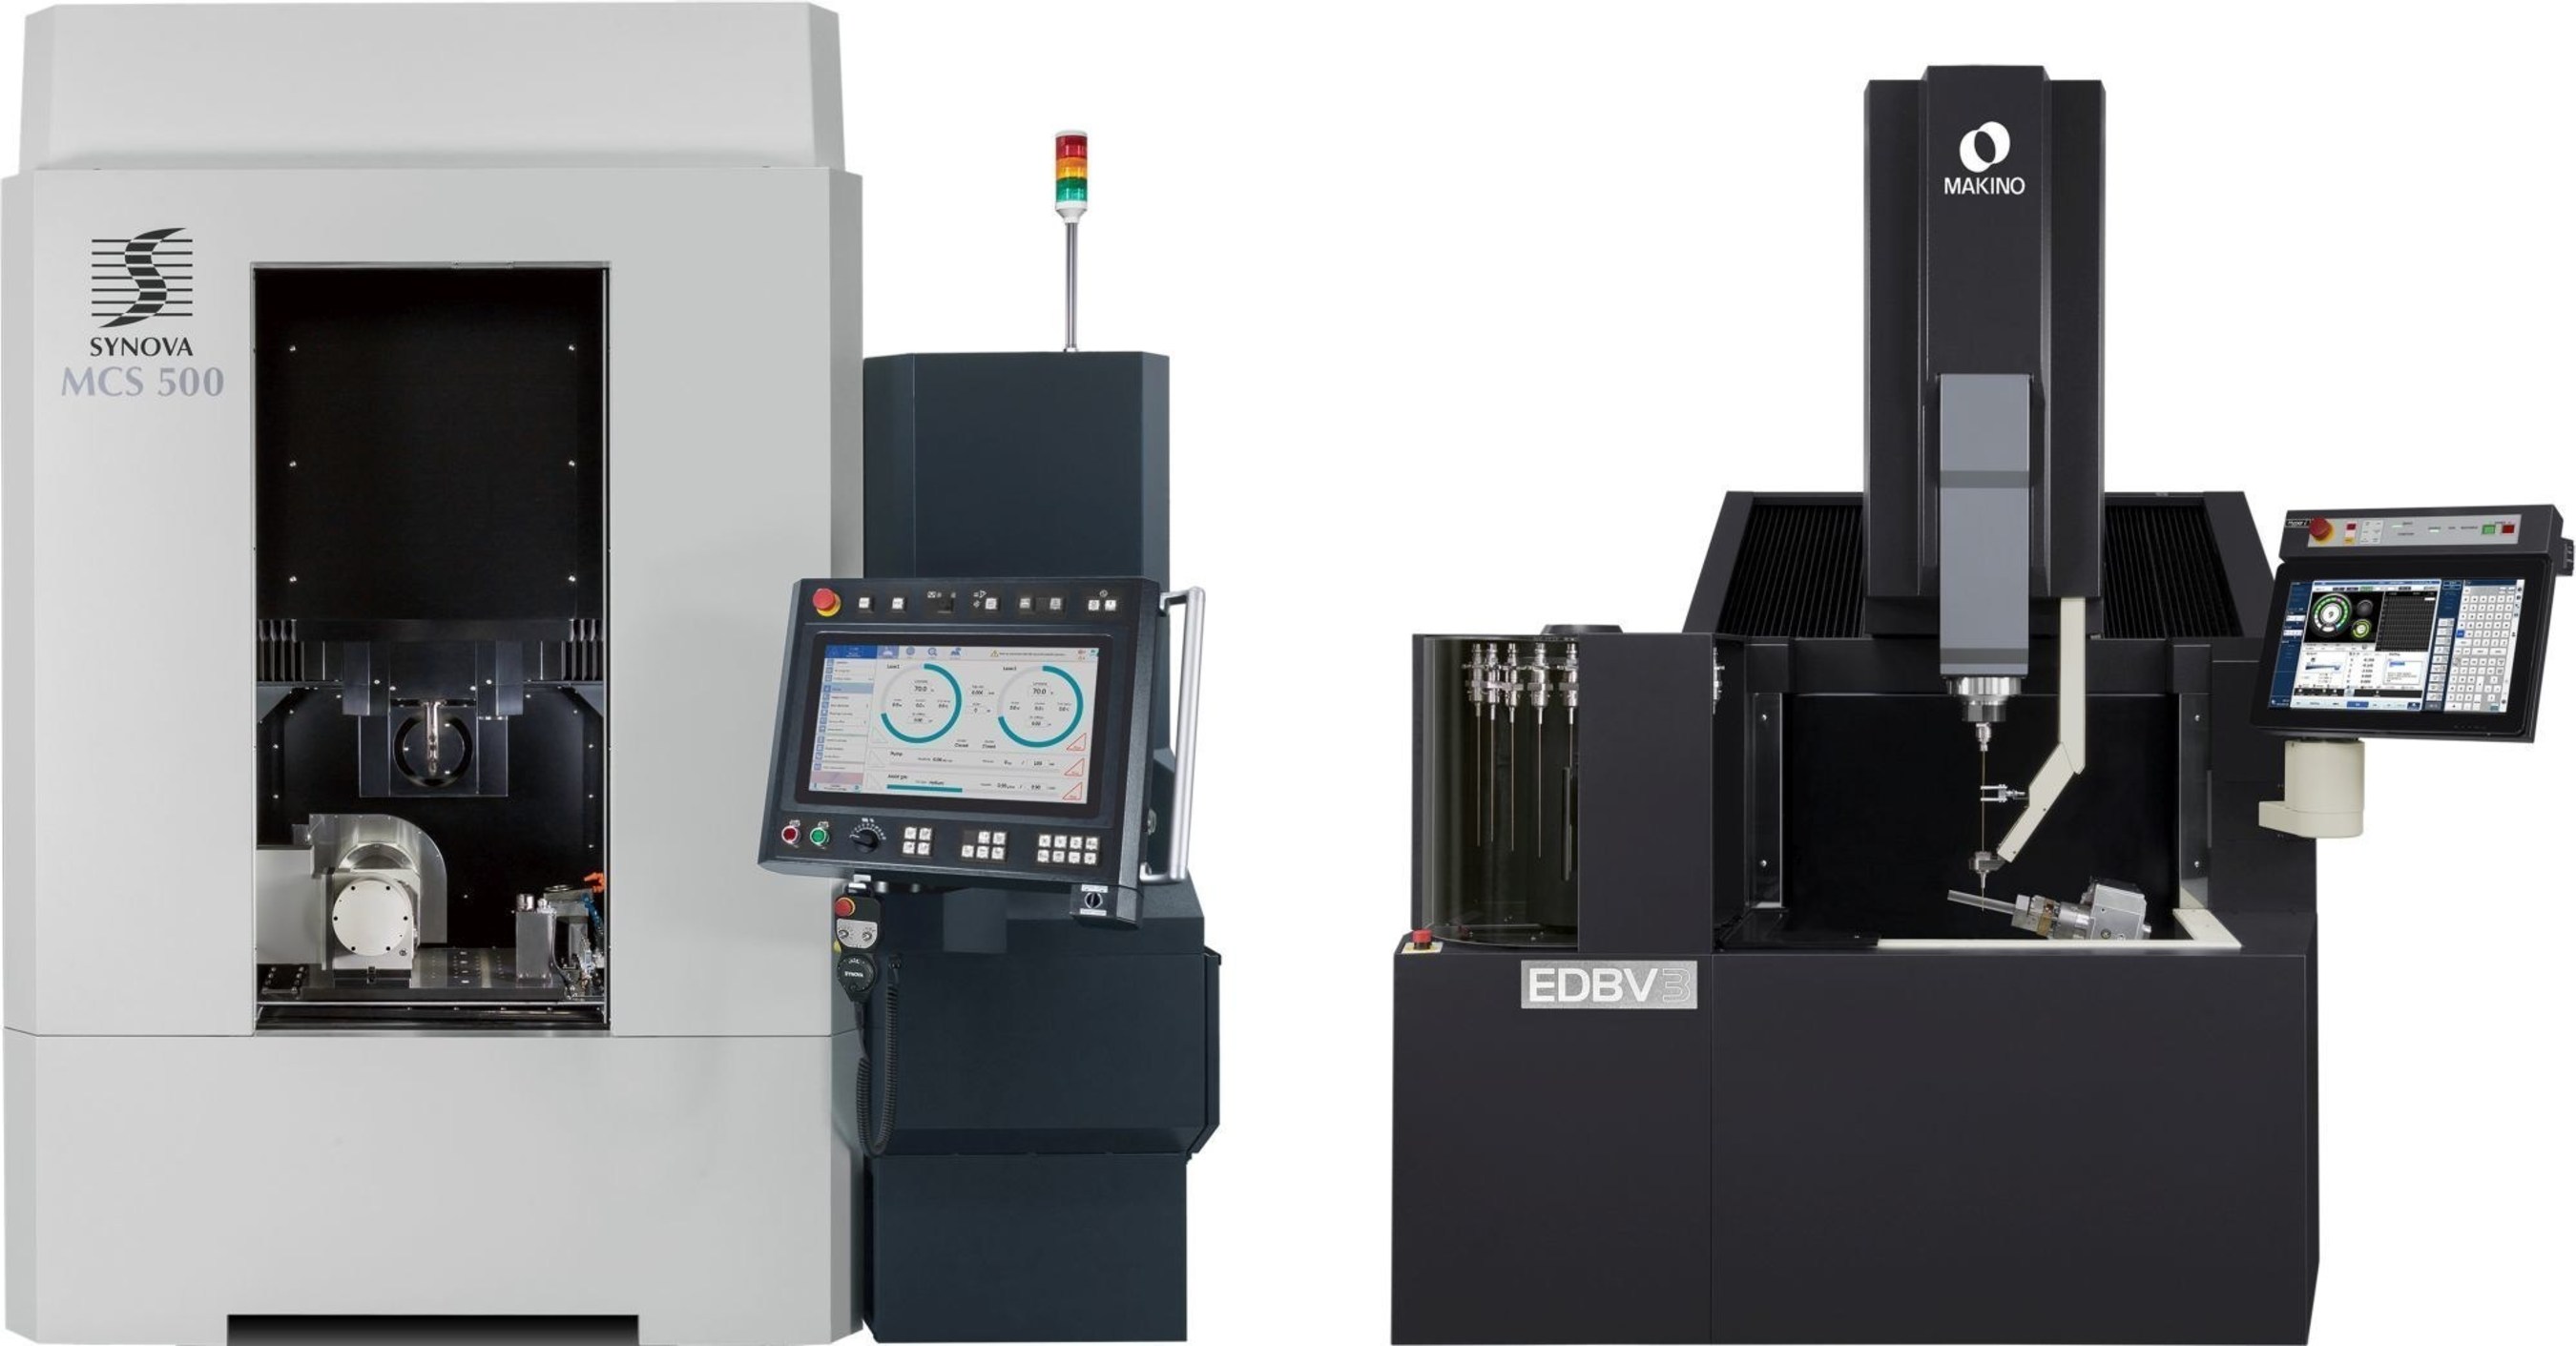 The Synova-Makino HybridCell consists of Synova's MCS 500 Laser MicroJet machine(R), along with Makino's EDBV3 EDM hole-drilling machine. The Laser MicroJet system is used to cut diffuser shapes in the coating layer and drilling metering holes, while the EDBV is used to drill deep through holes. It is a fully automated, manufacturing-ready, work cell that can handle a wide range of hole-drilling applications. (PRNewsFoto/Synova S.A.)